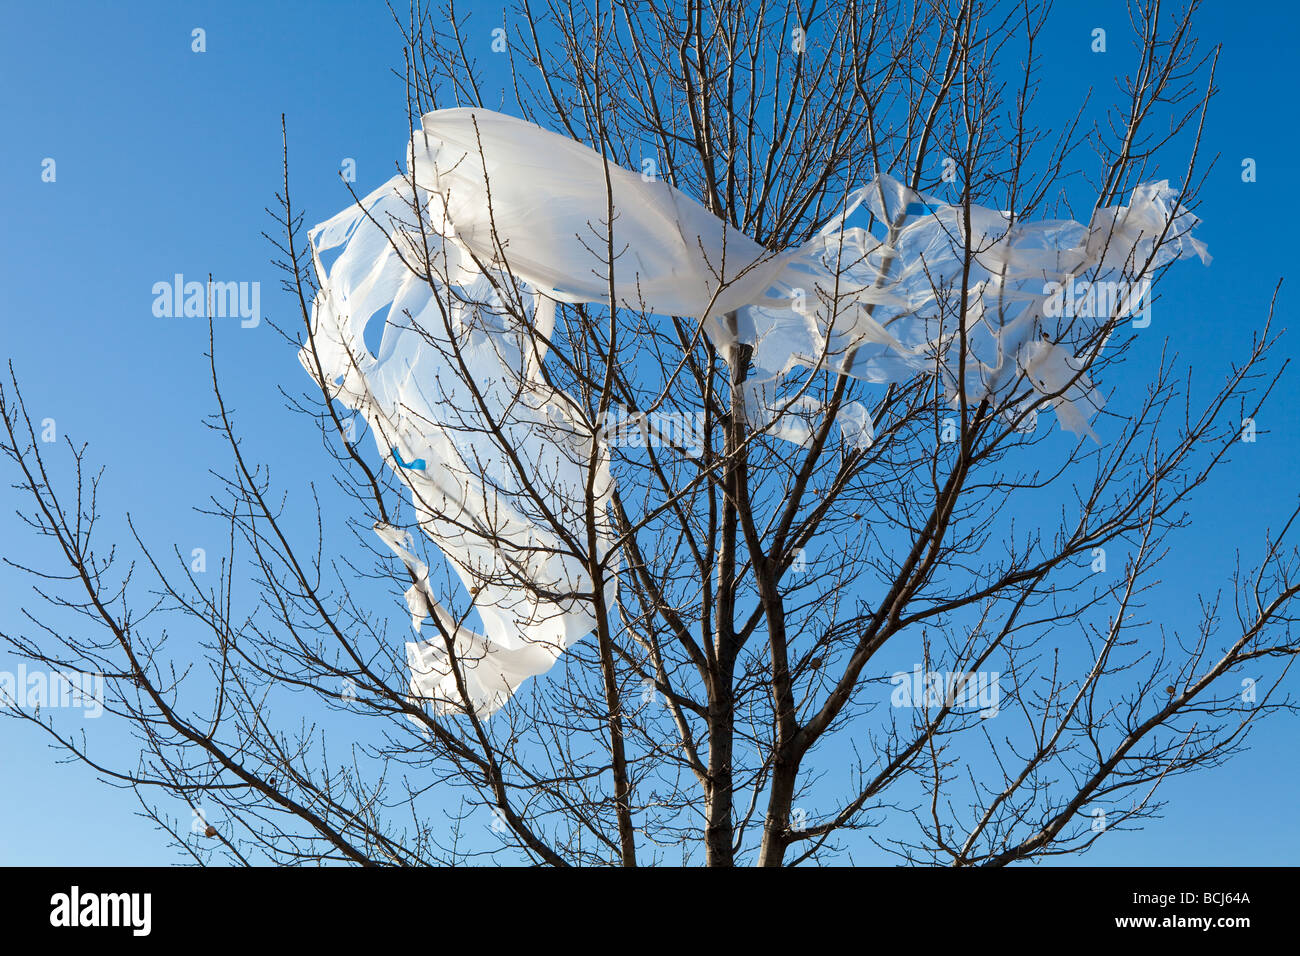 White plastic caught in branches of leafless tree against sky Dallas Texas USA Stock Photo